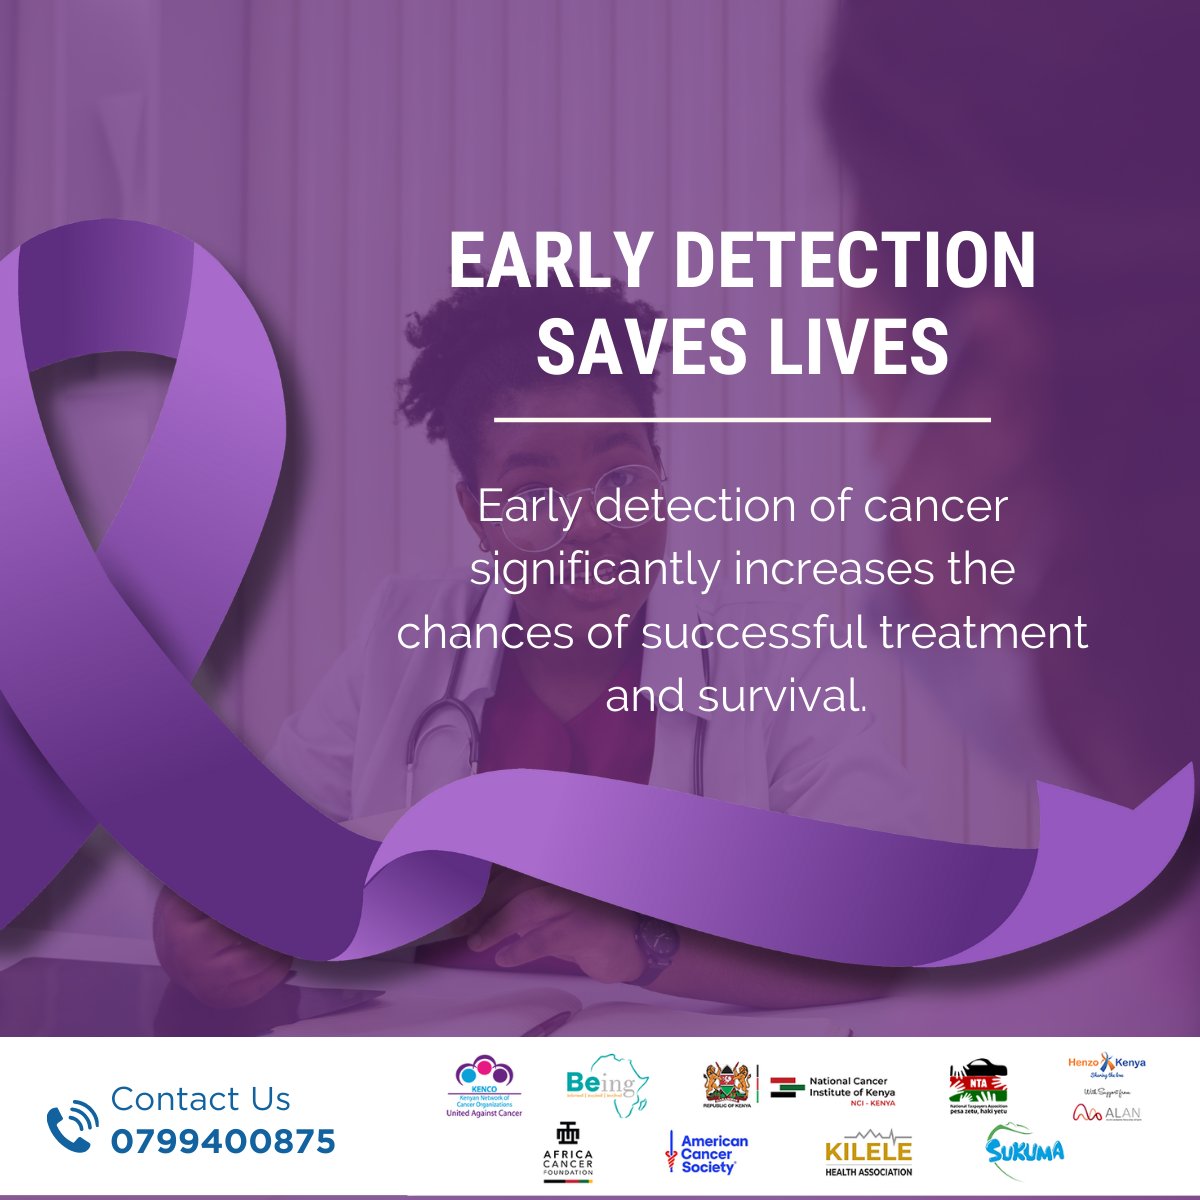 40% of cancers can be prevented by leading a healthy lifestyle. Go for regular screening. Early detection saves lives. #Cancer is curable if detected early. #NationalCancerSurvivorsMonth #ACancerFreeAfrica